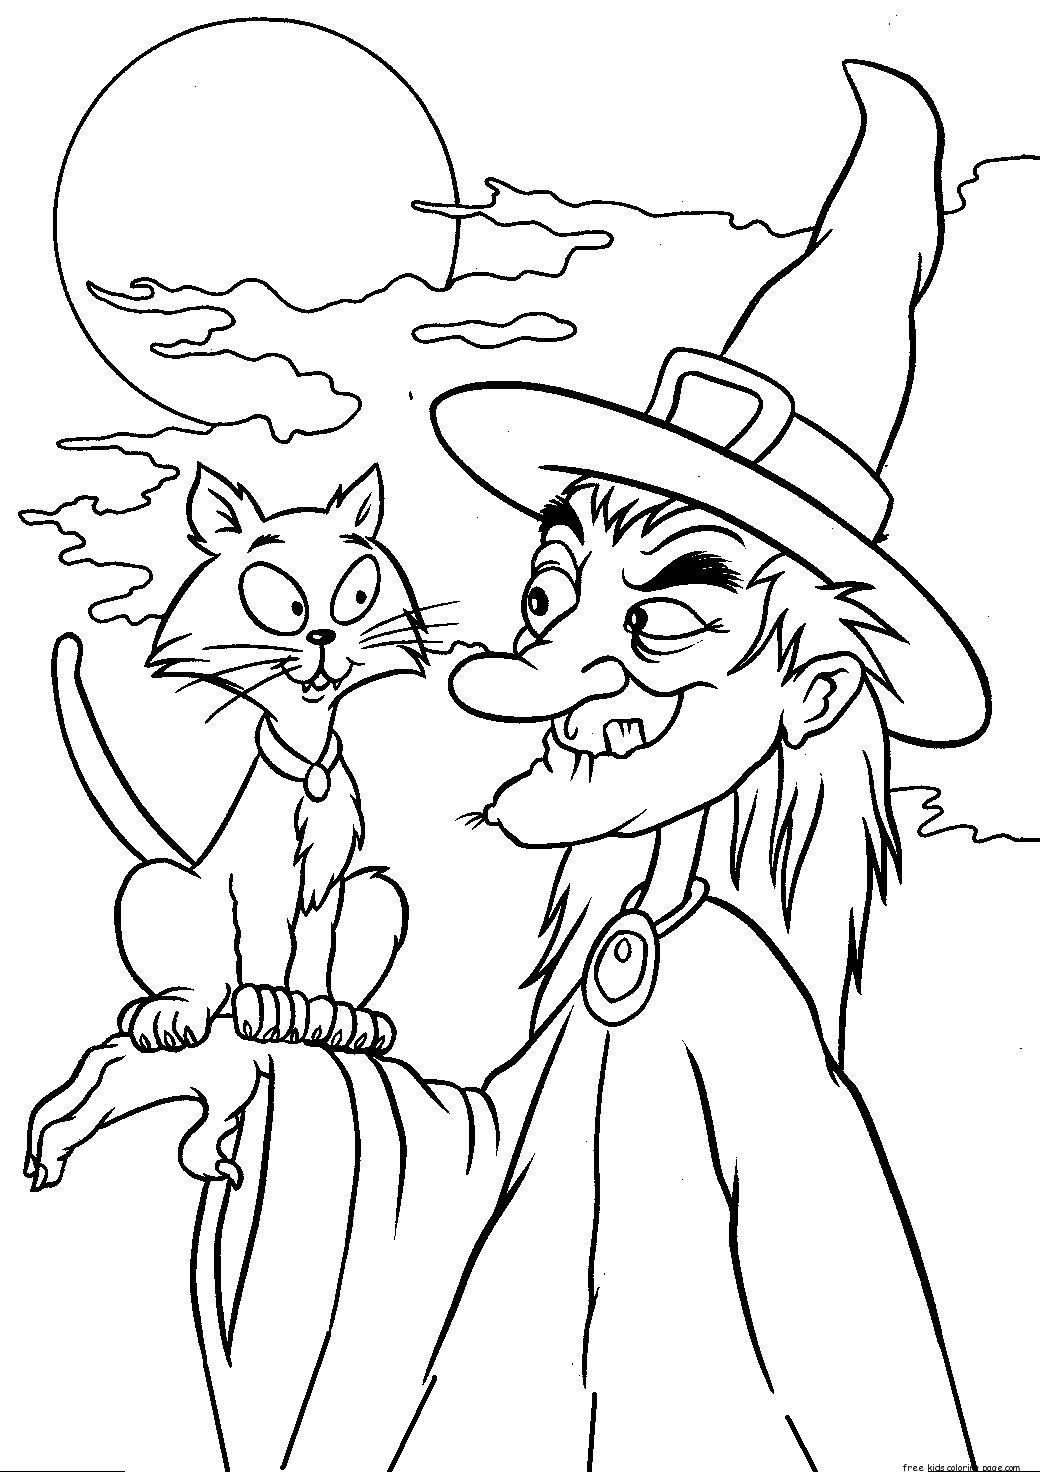 Halloween witches and cat coloring pages